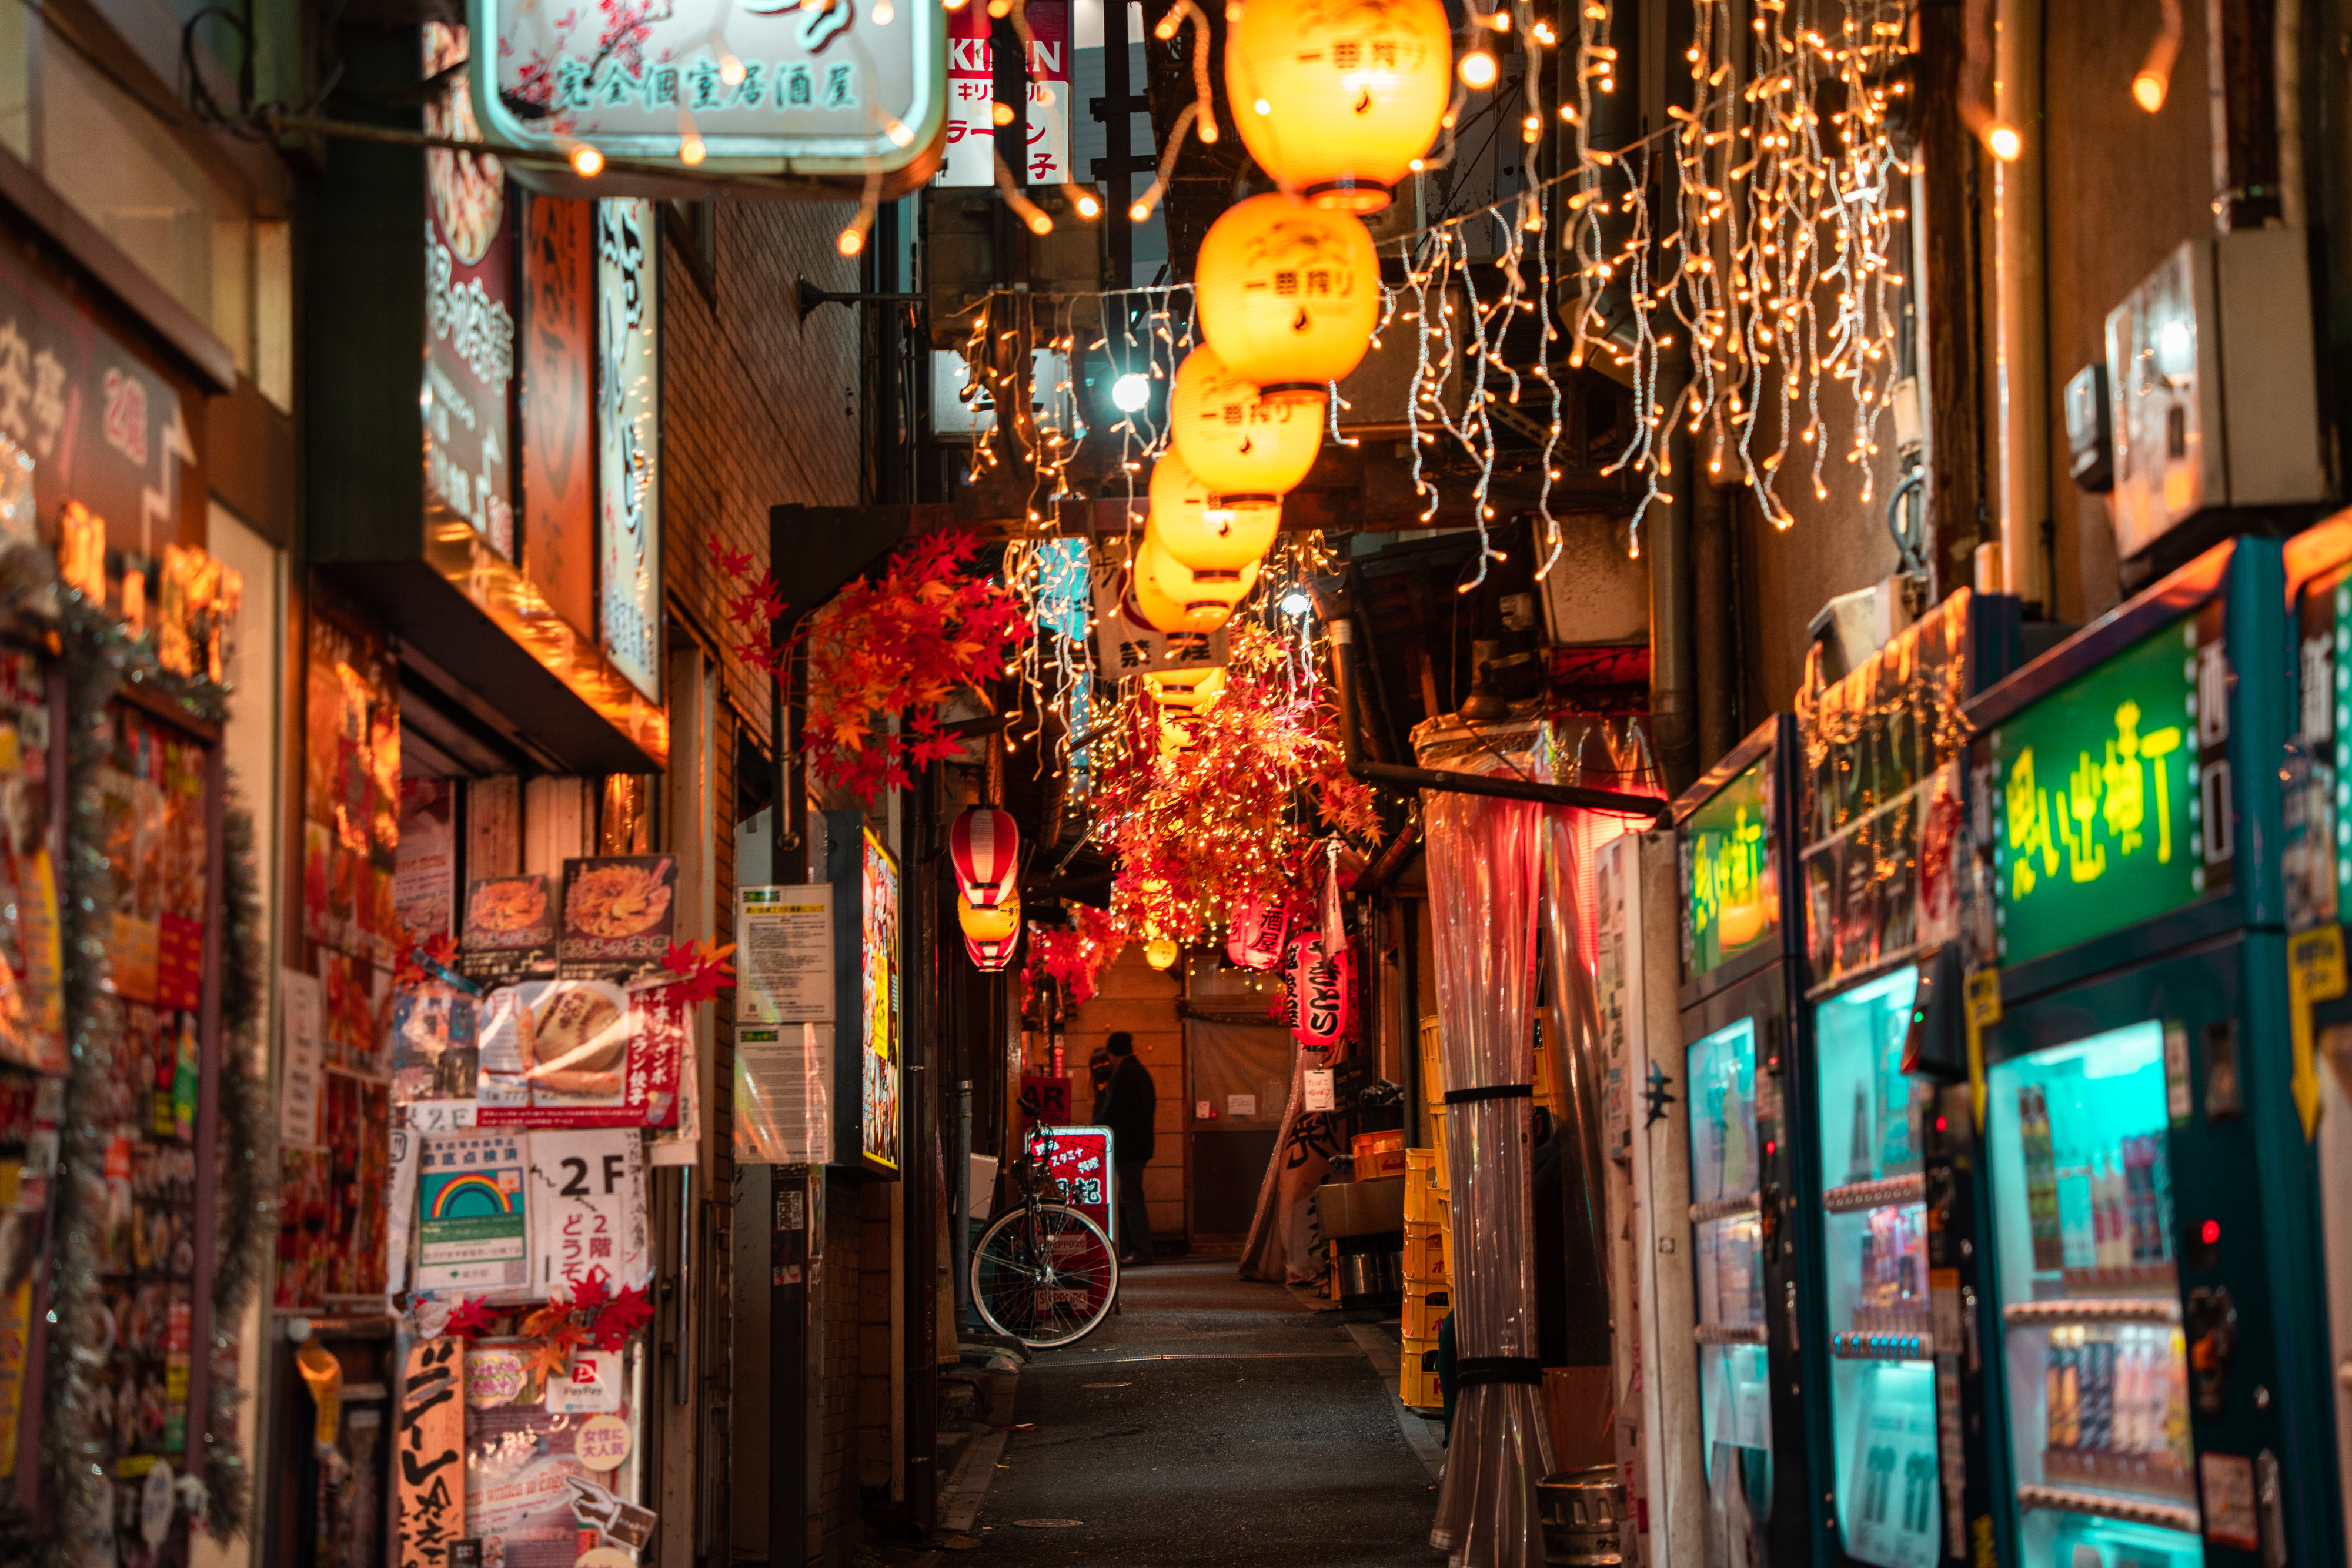 Lantern-lit alley with shops and a bicycle, capturing the ambiance of a travel destination